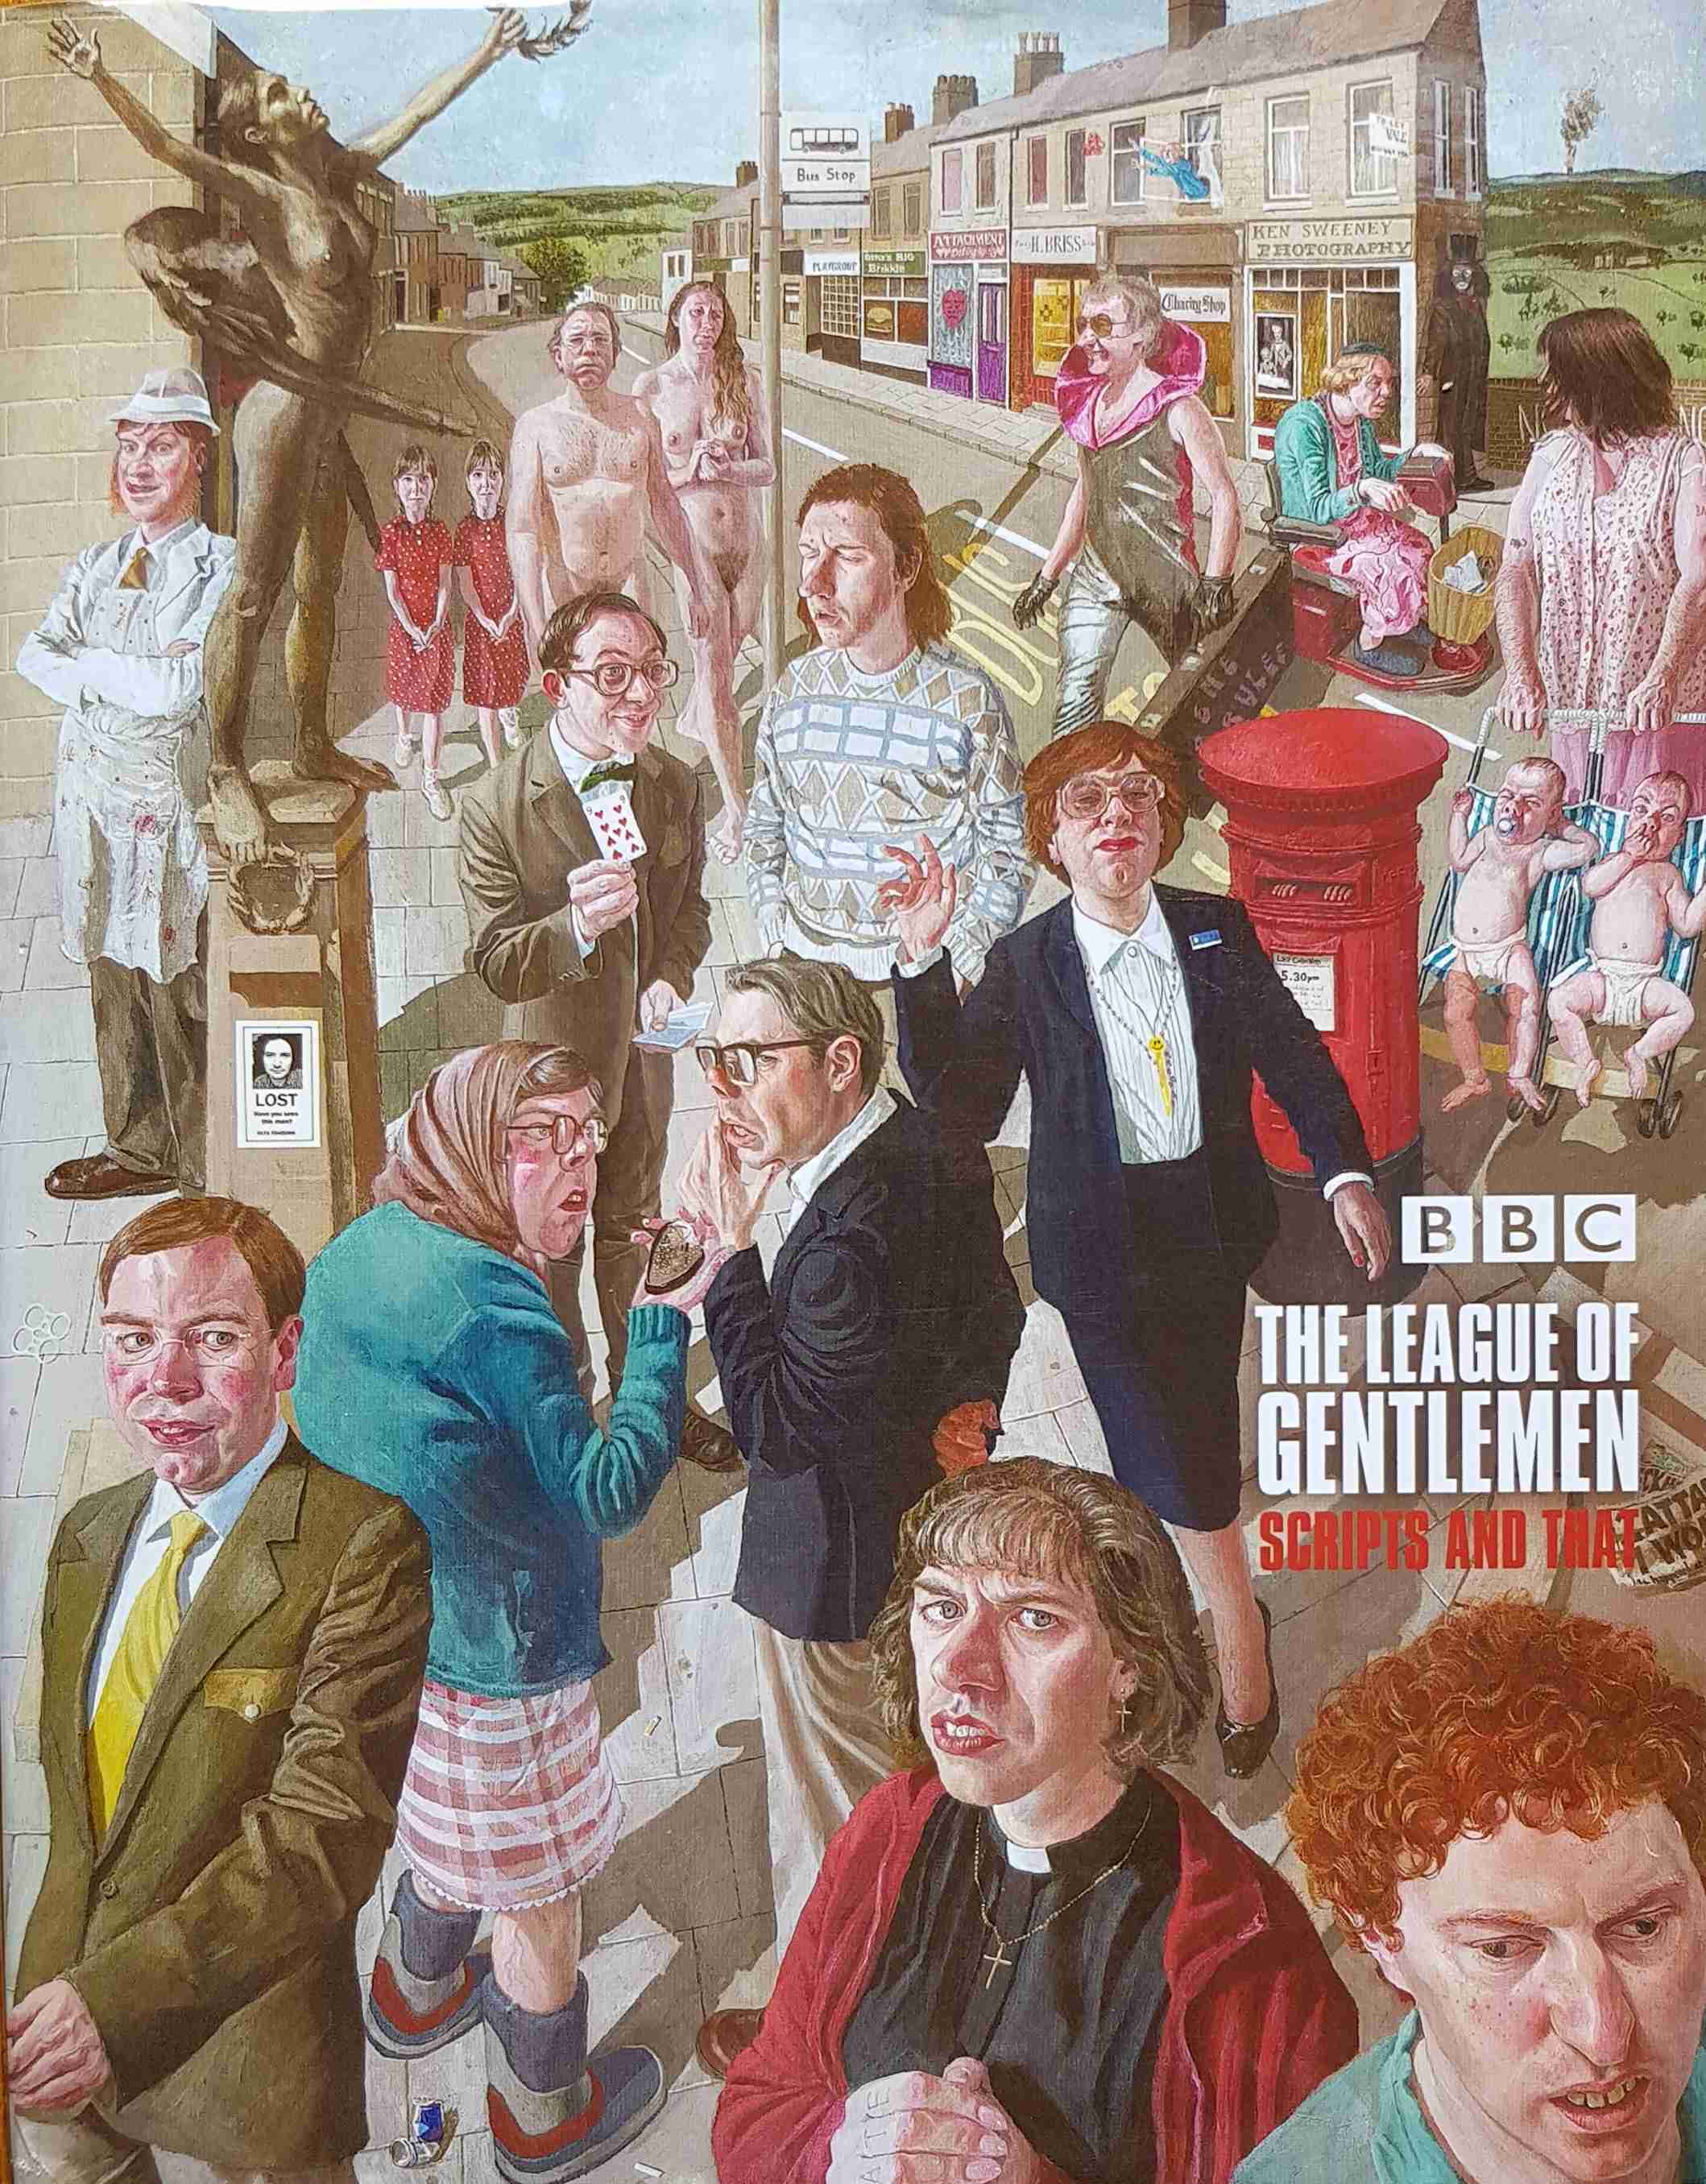 Picture of 0-563-48775-5 The league of gentlemen - Scripts and that by artist Jeremy Dyson / Mark Gatiss / Steve Pemberton / Reece Shearsmith from the BBC records and Tapes library